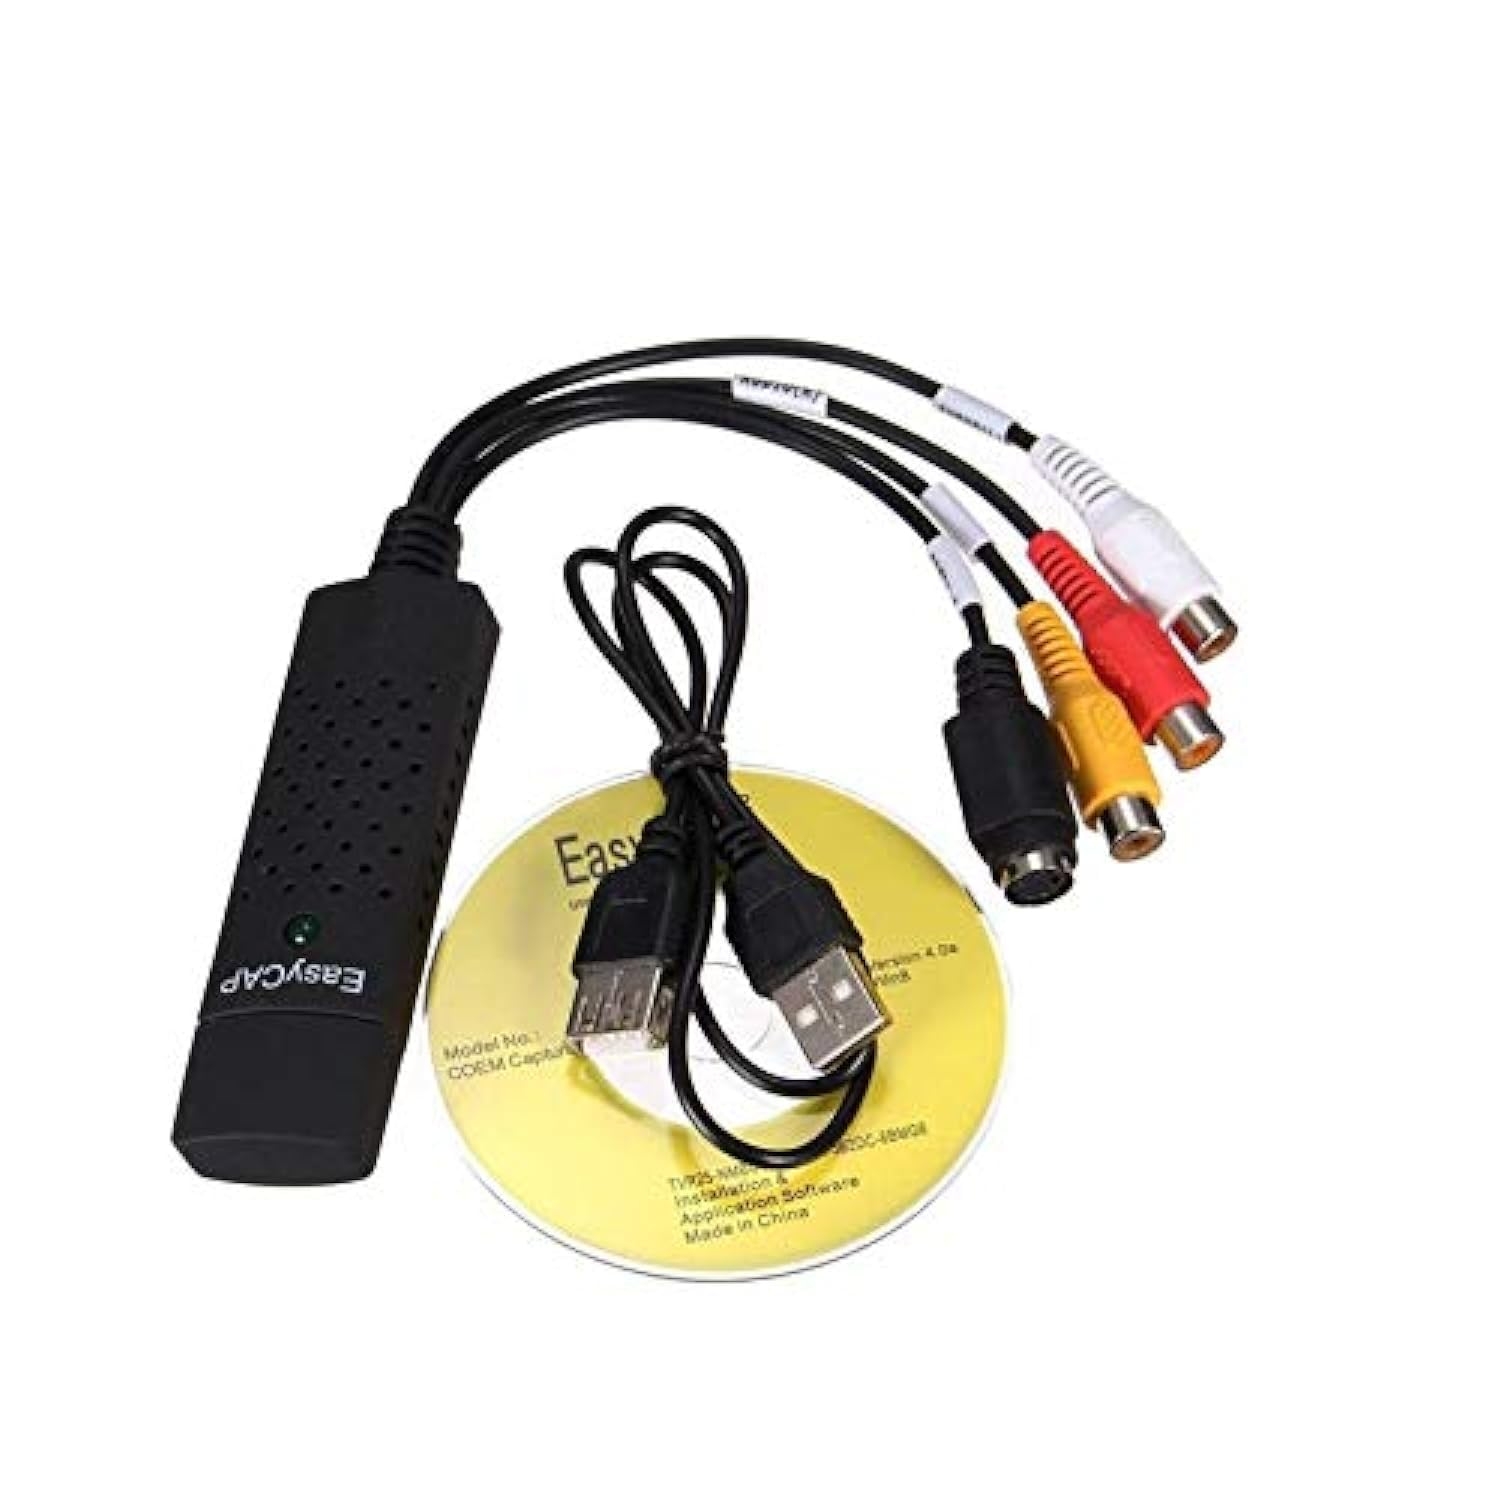 TERABYTE Easycap USB Audio & Video Capturing Device from TV, DVD, Video, Audio Adapter Card